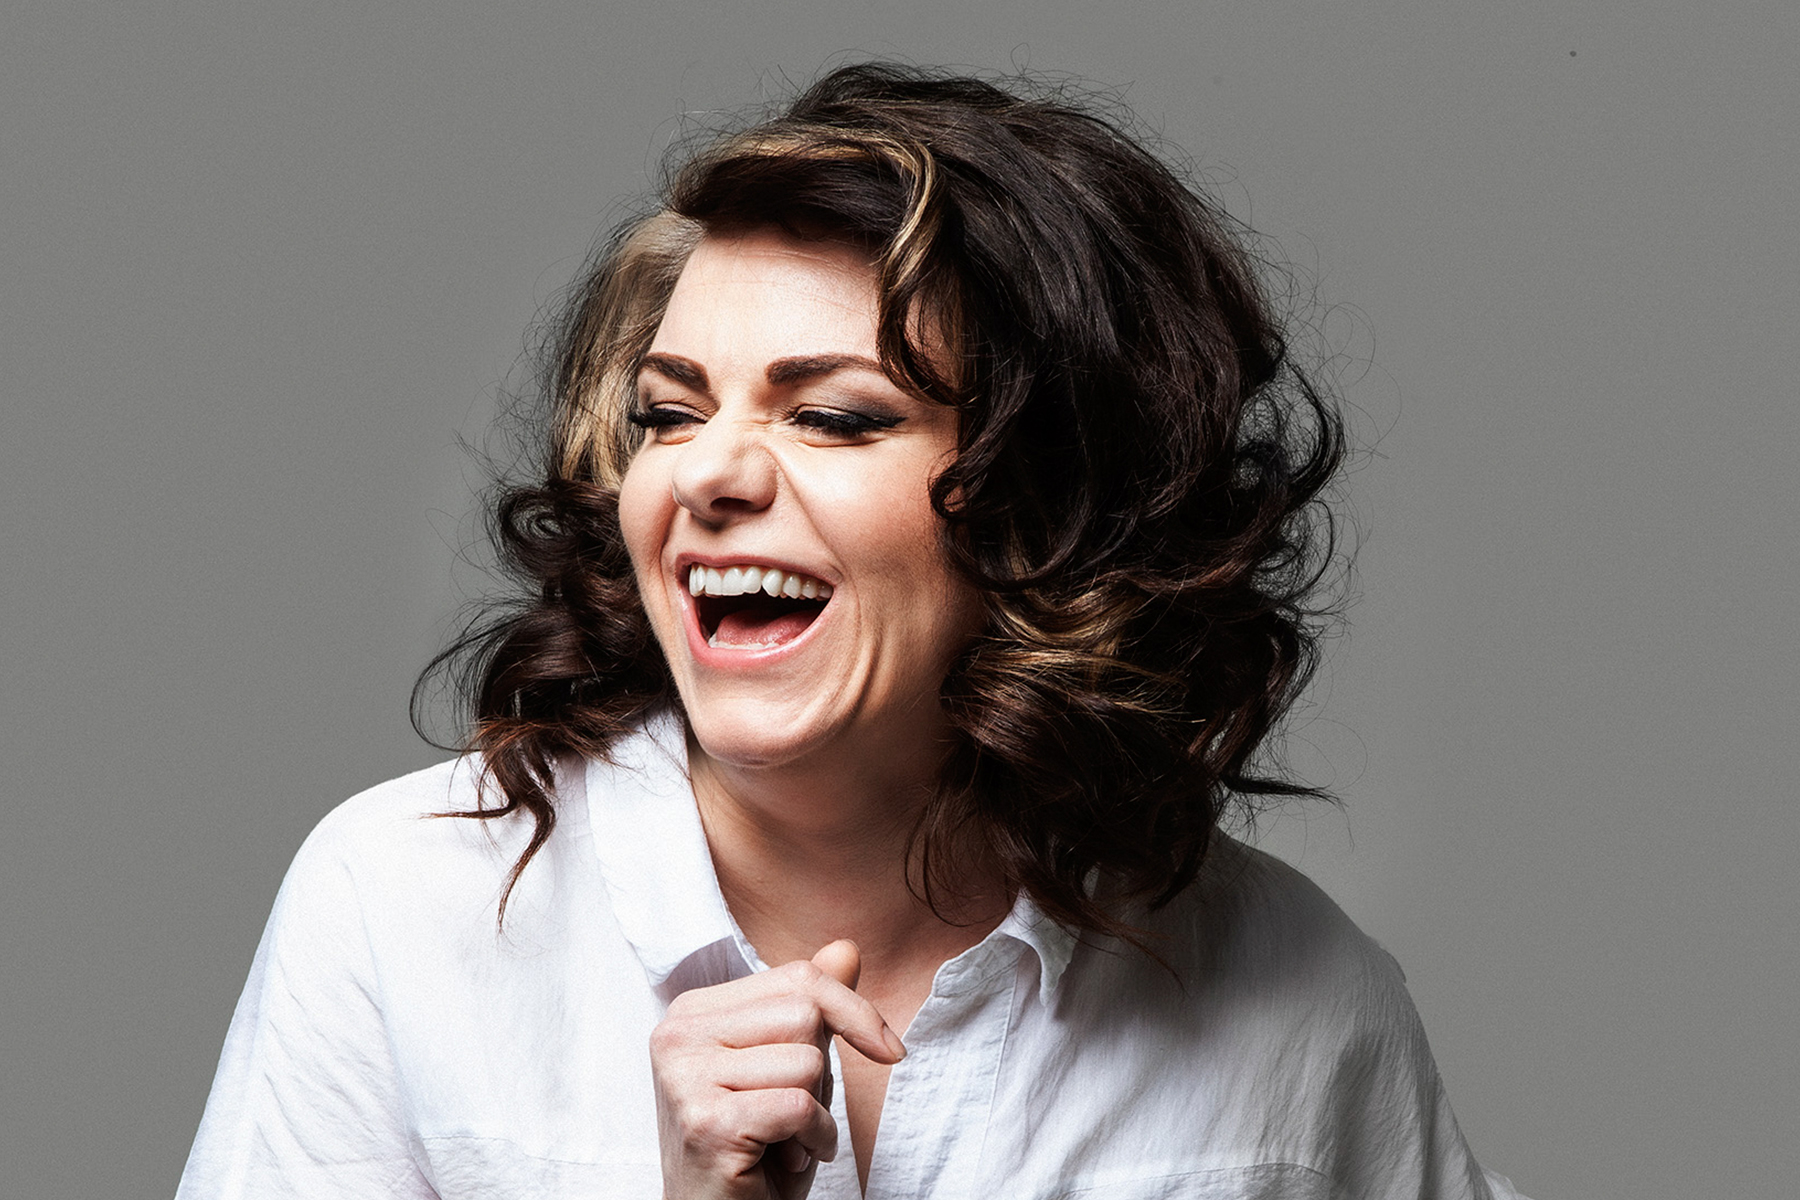 A photo of author Caitlin Moran laughing